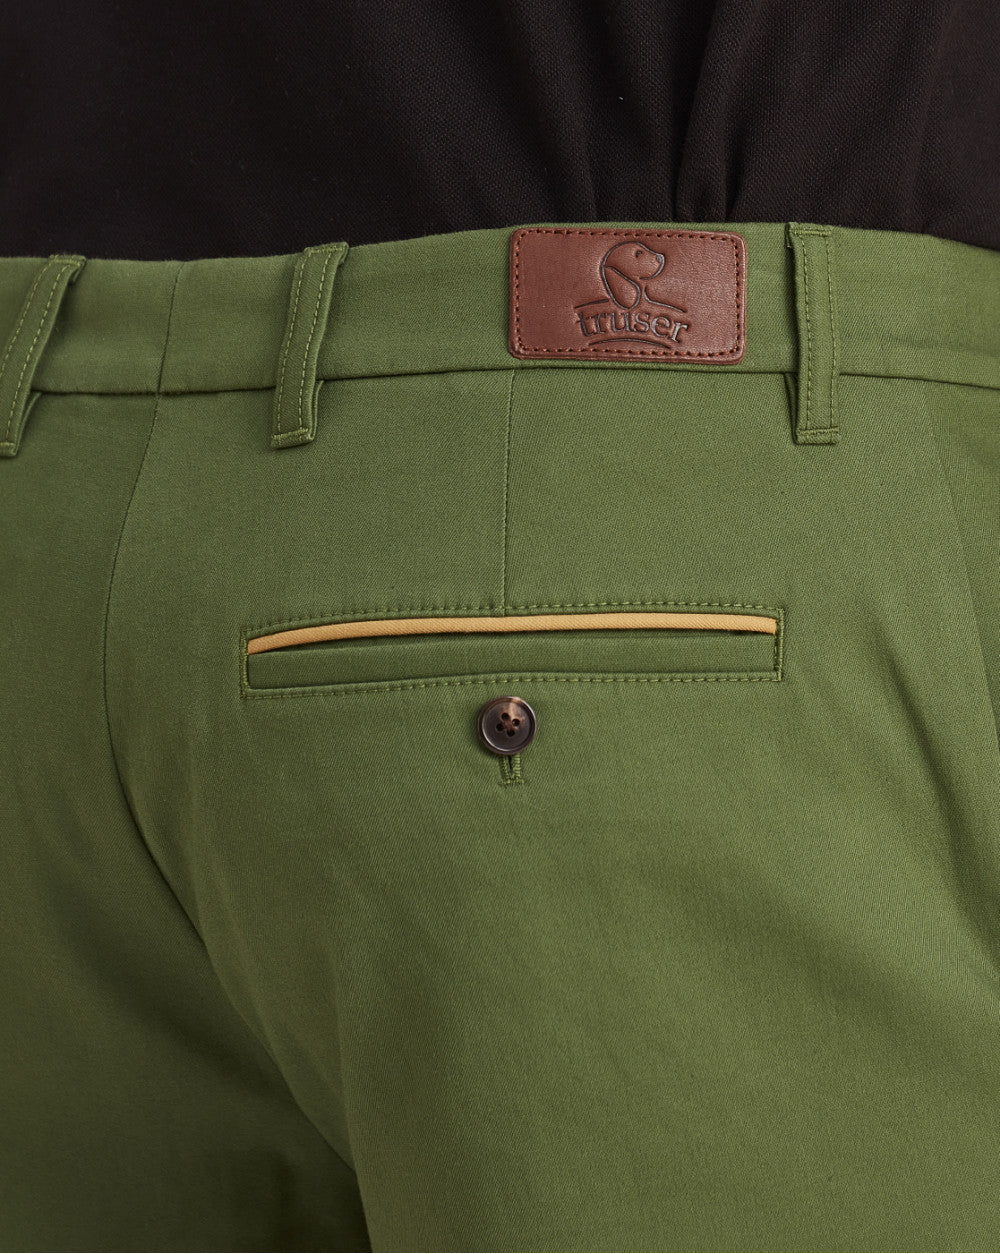 Tapered Fit Chino Shorts - Chive Green